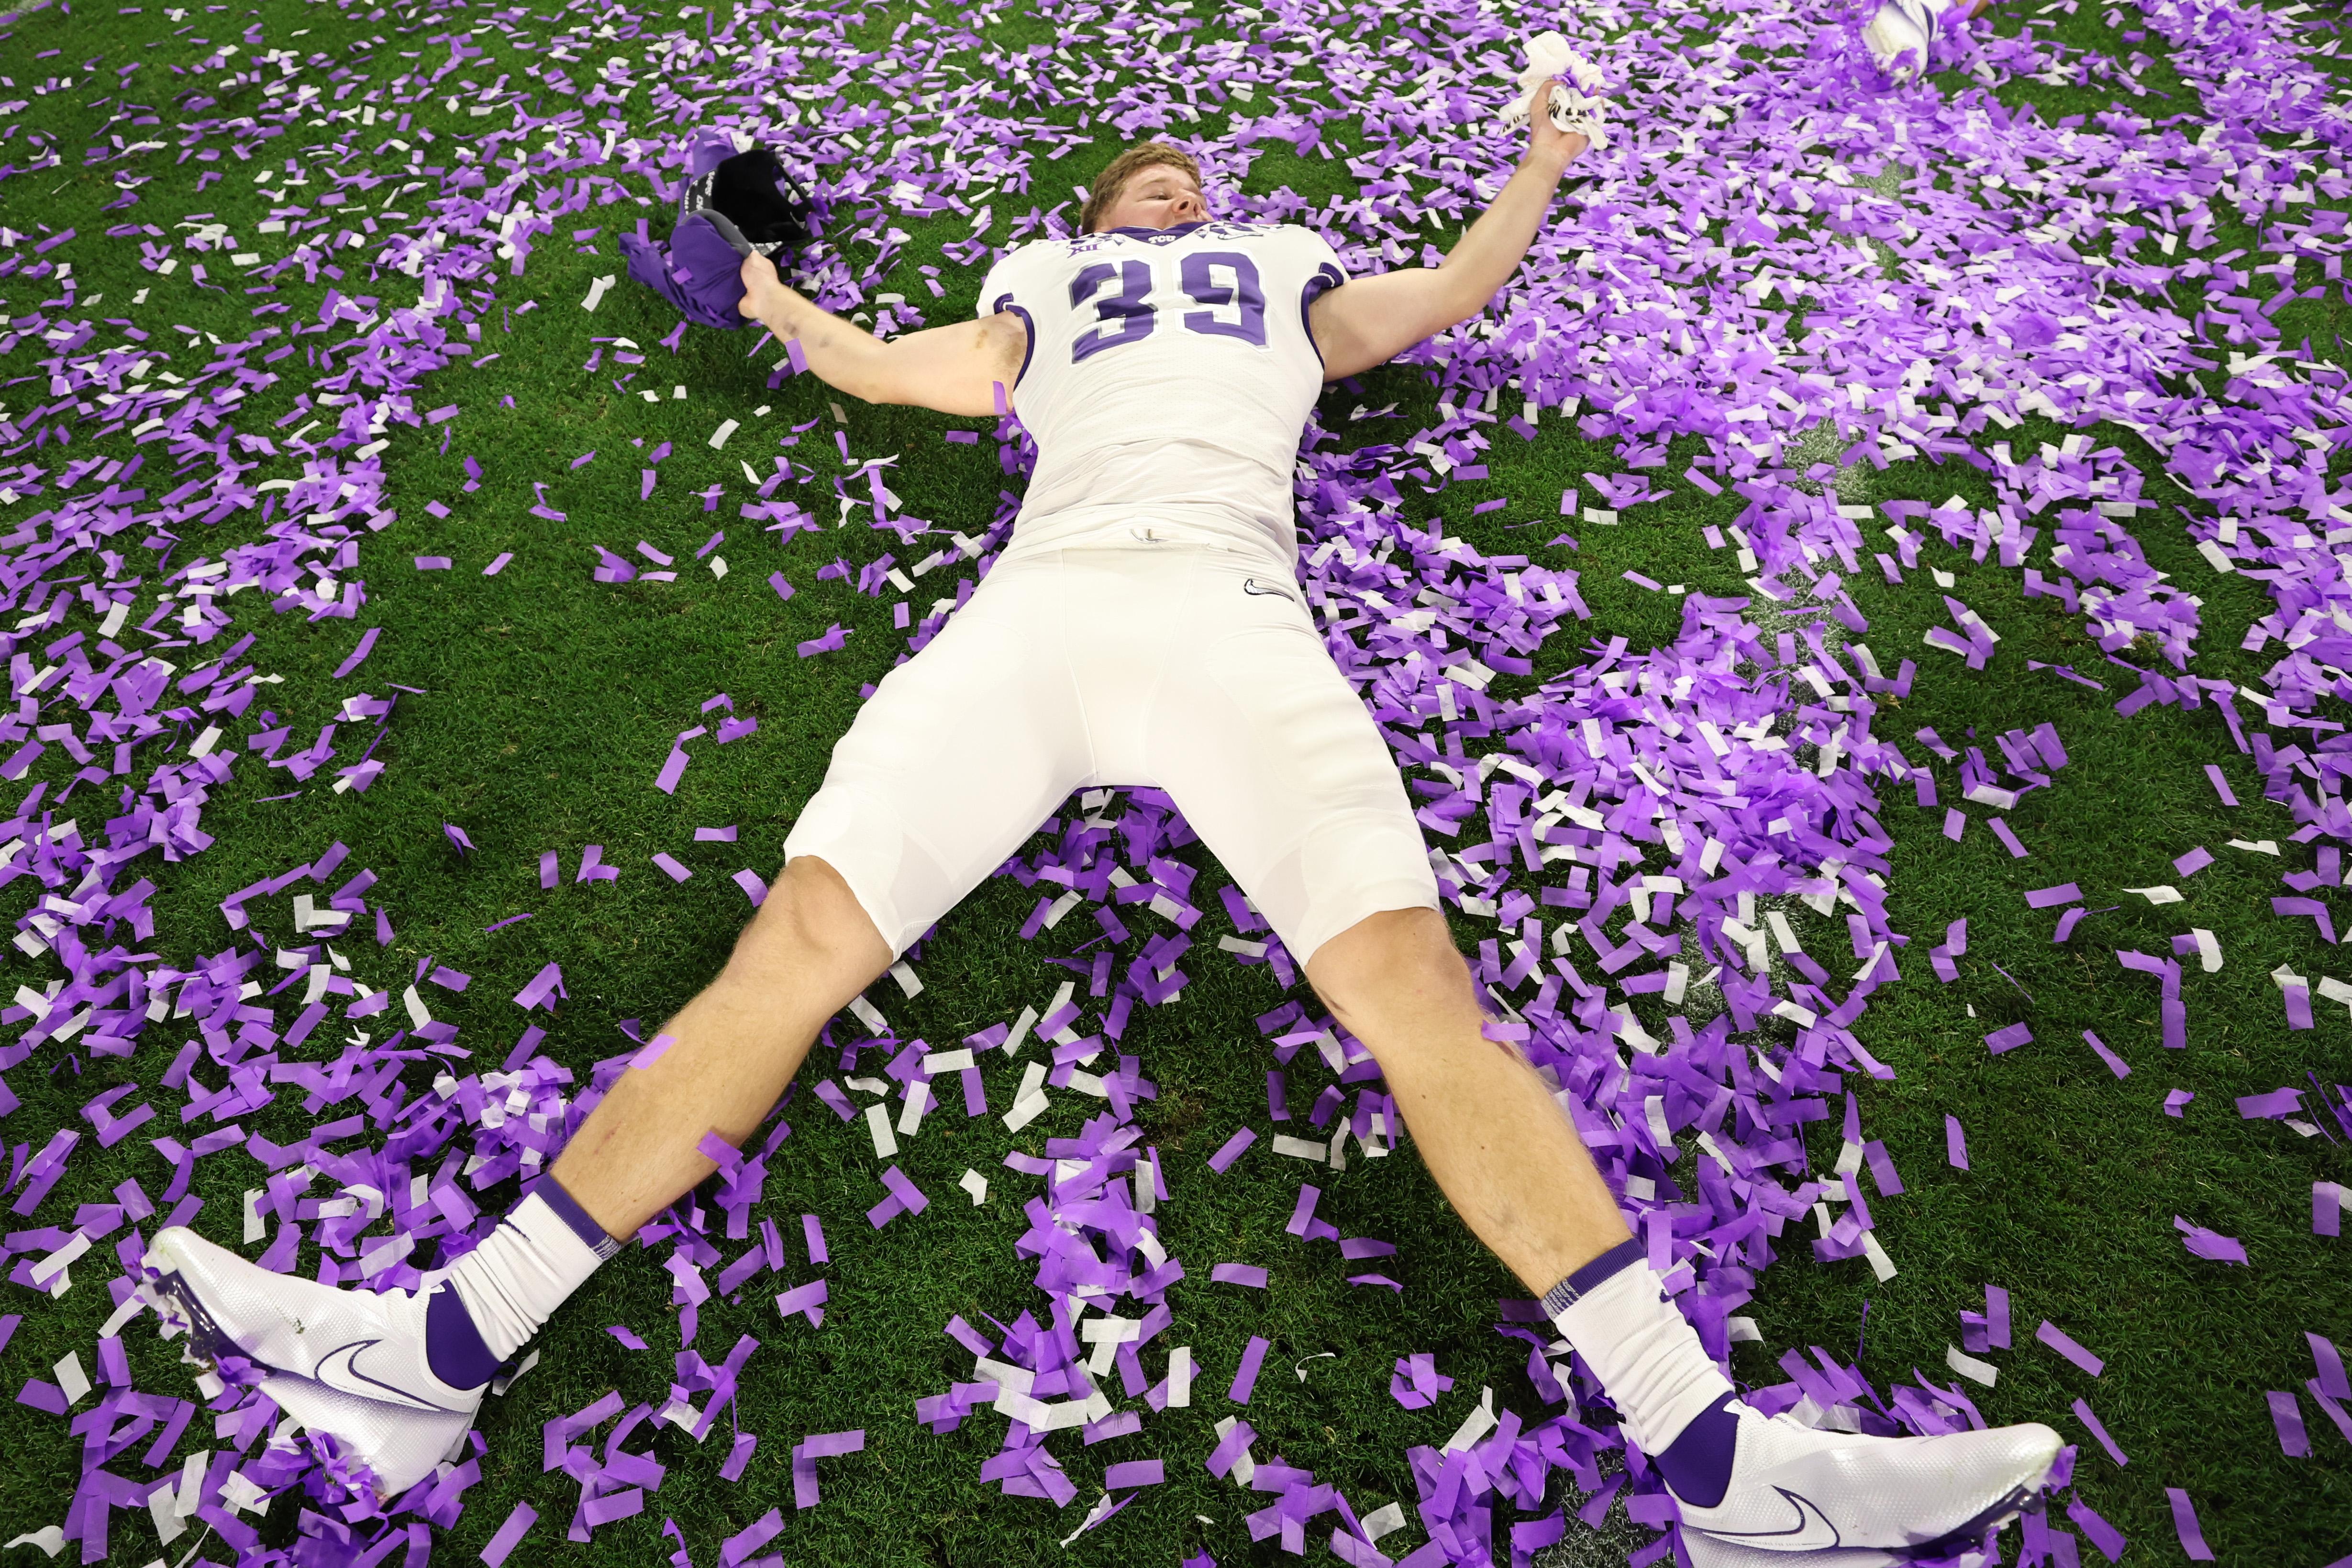 A TCU football player lies on his back and makes a "snow angel" in purple confetti. 